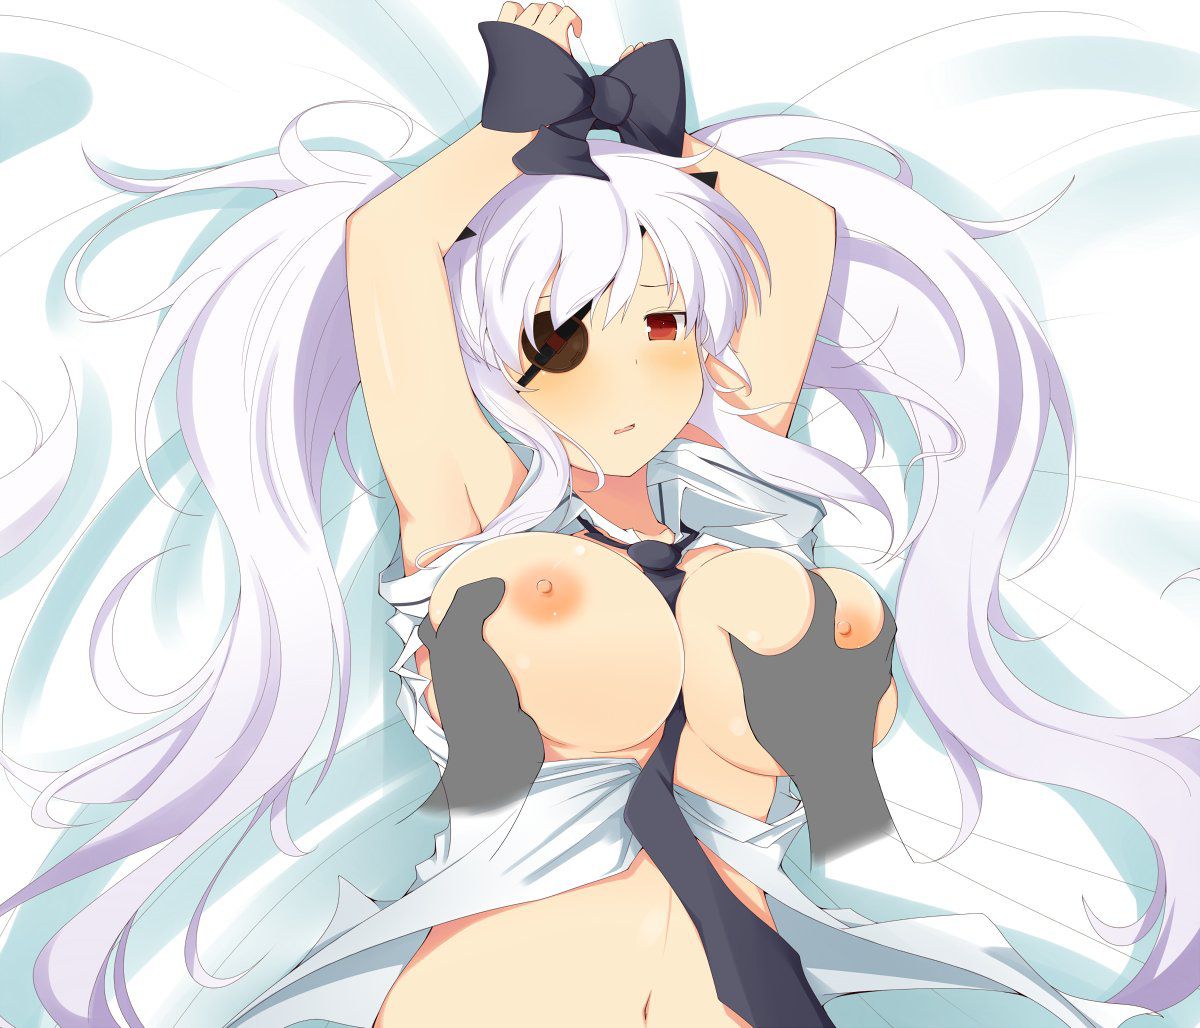 【Secondary Erotic】 Here is the erotic image of the characters appearing in Senran Kagura 4